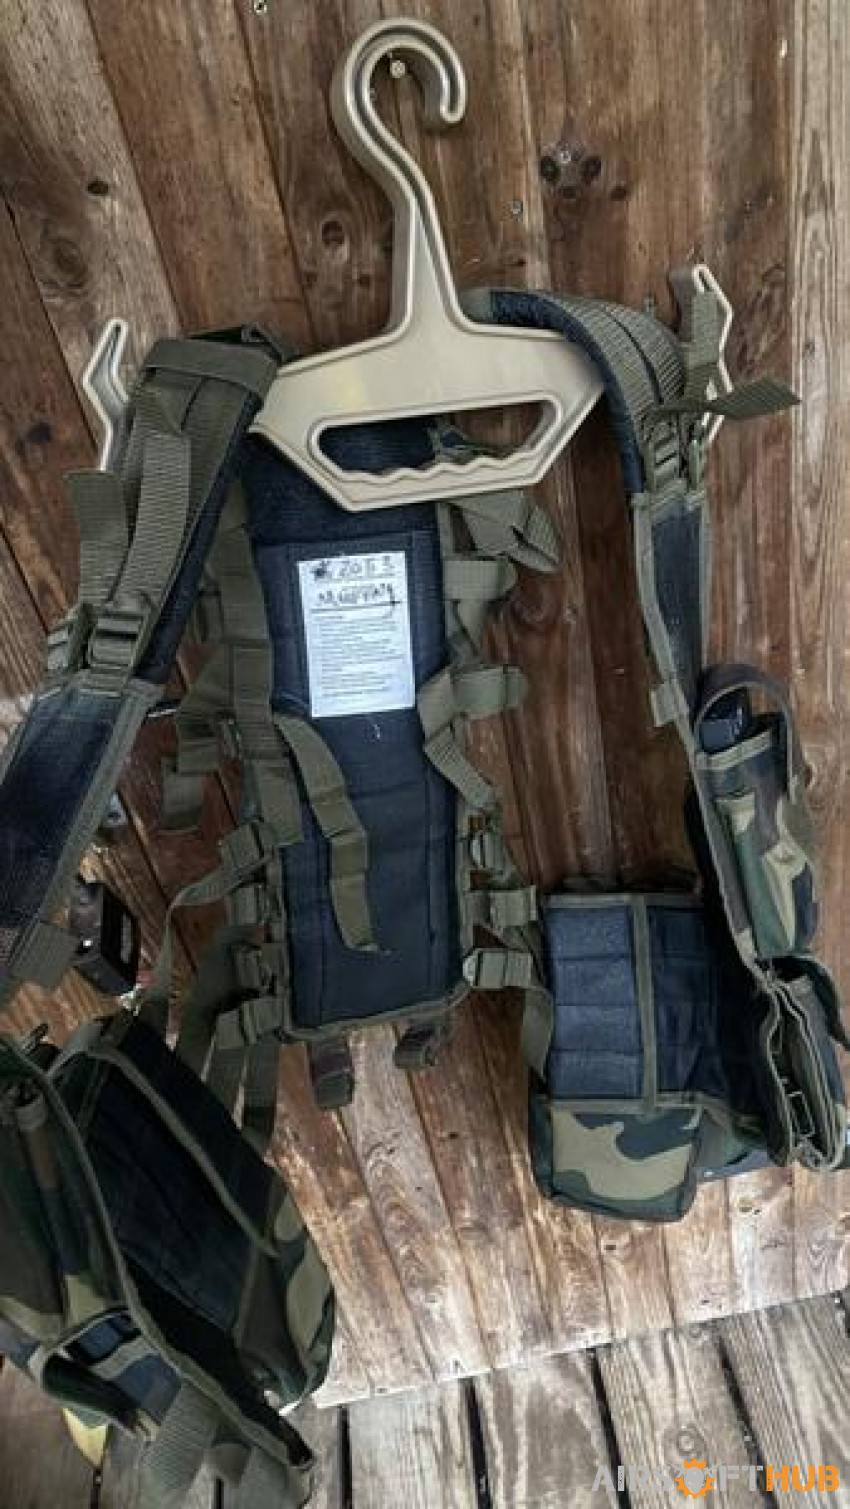 80s/90s style SAS kit - Airsoft Hub Buy & Sell Used Airsoft Equipment ...